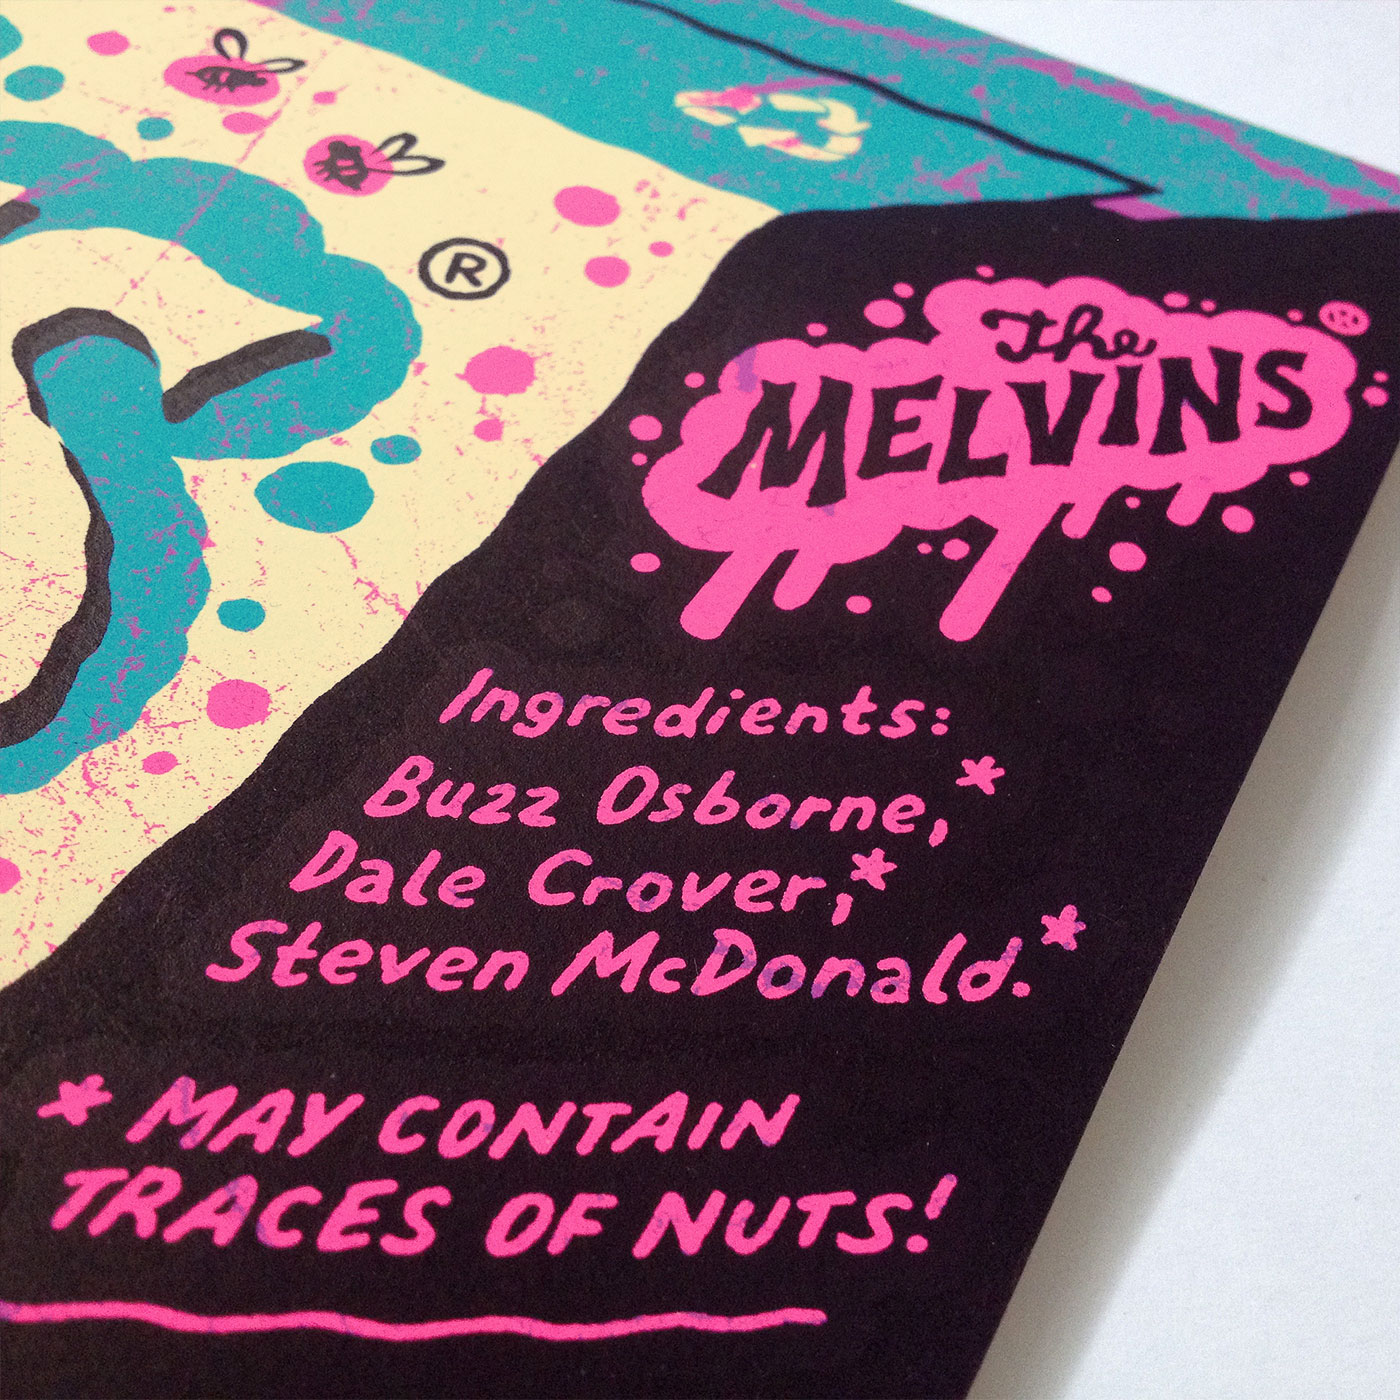 Melvins gigposter by Michael Hacker